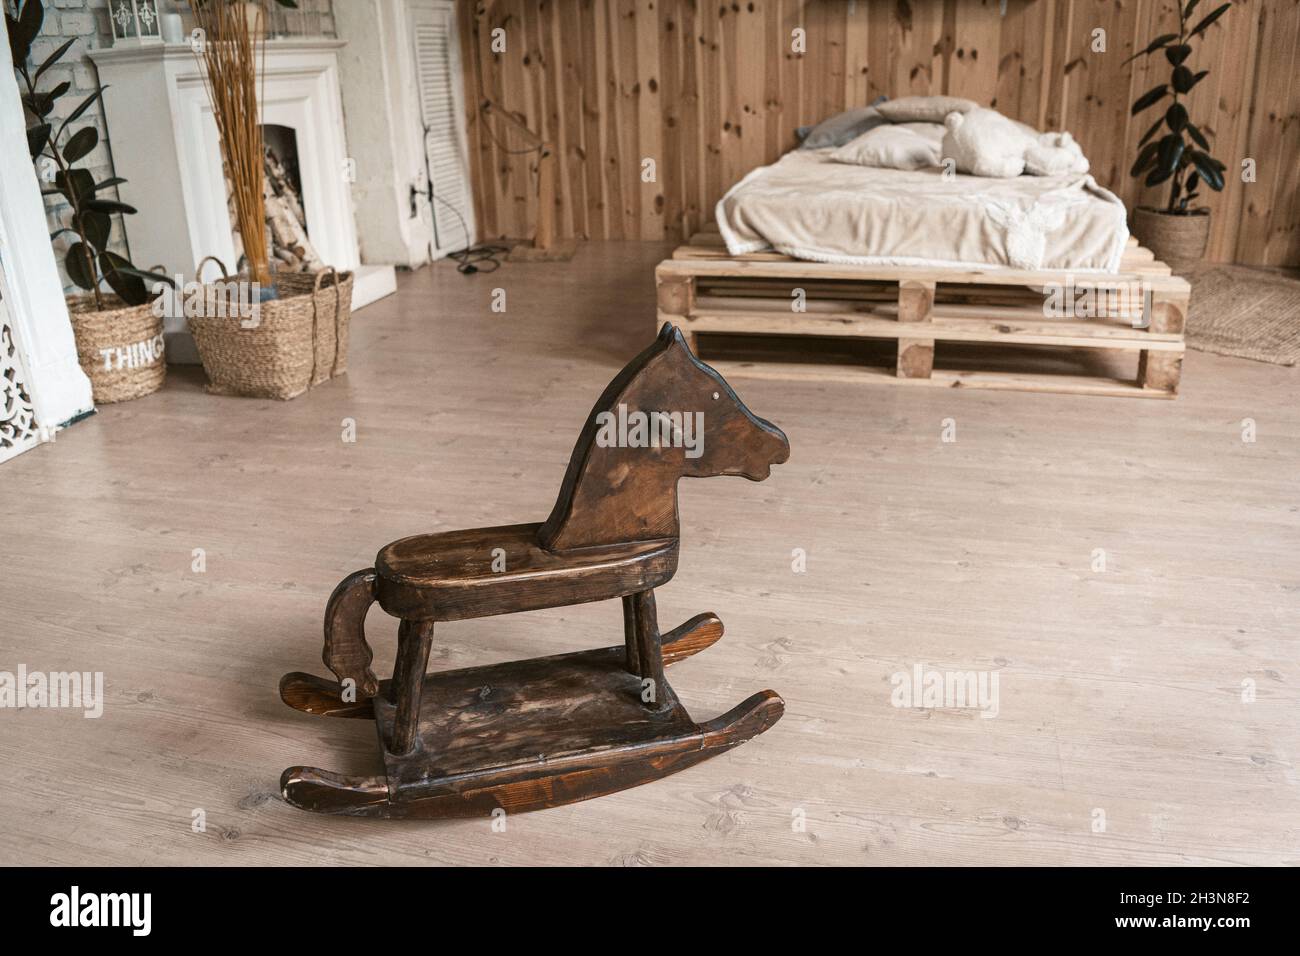 Bedroom in the interior of wood with a wooden horse. There's a children's horse in the foreground. In the background is a bed an Stock Photo